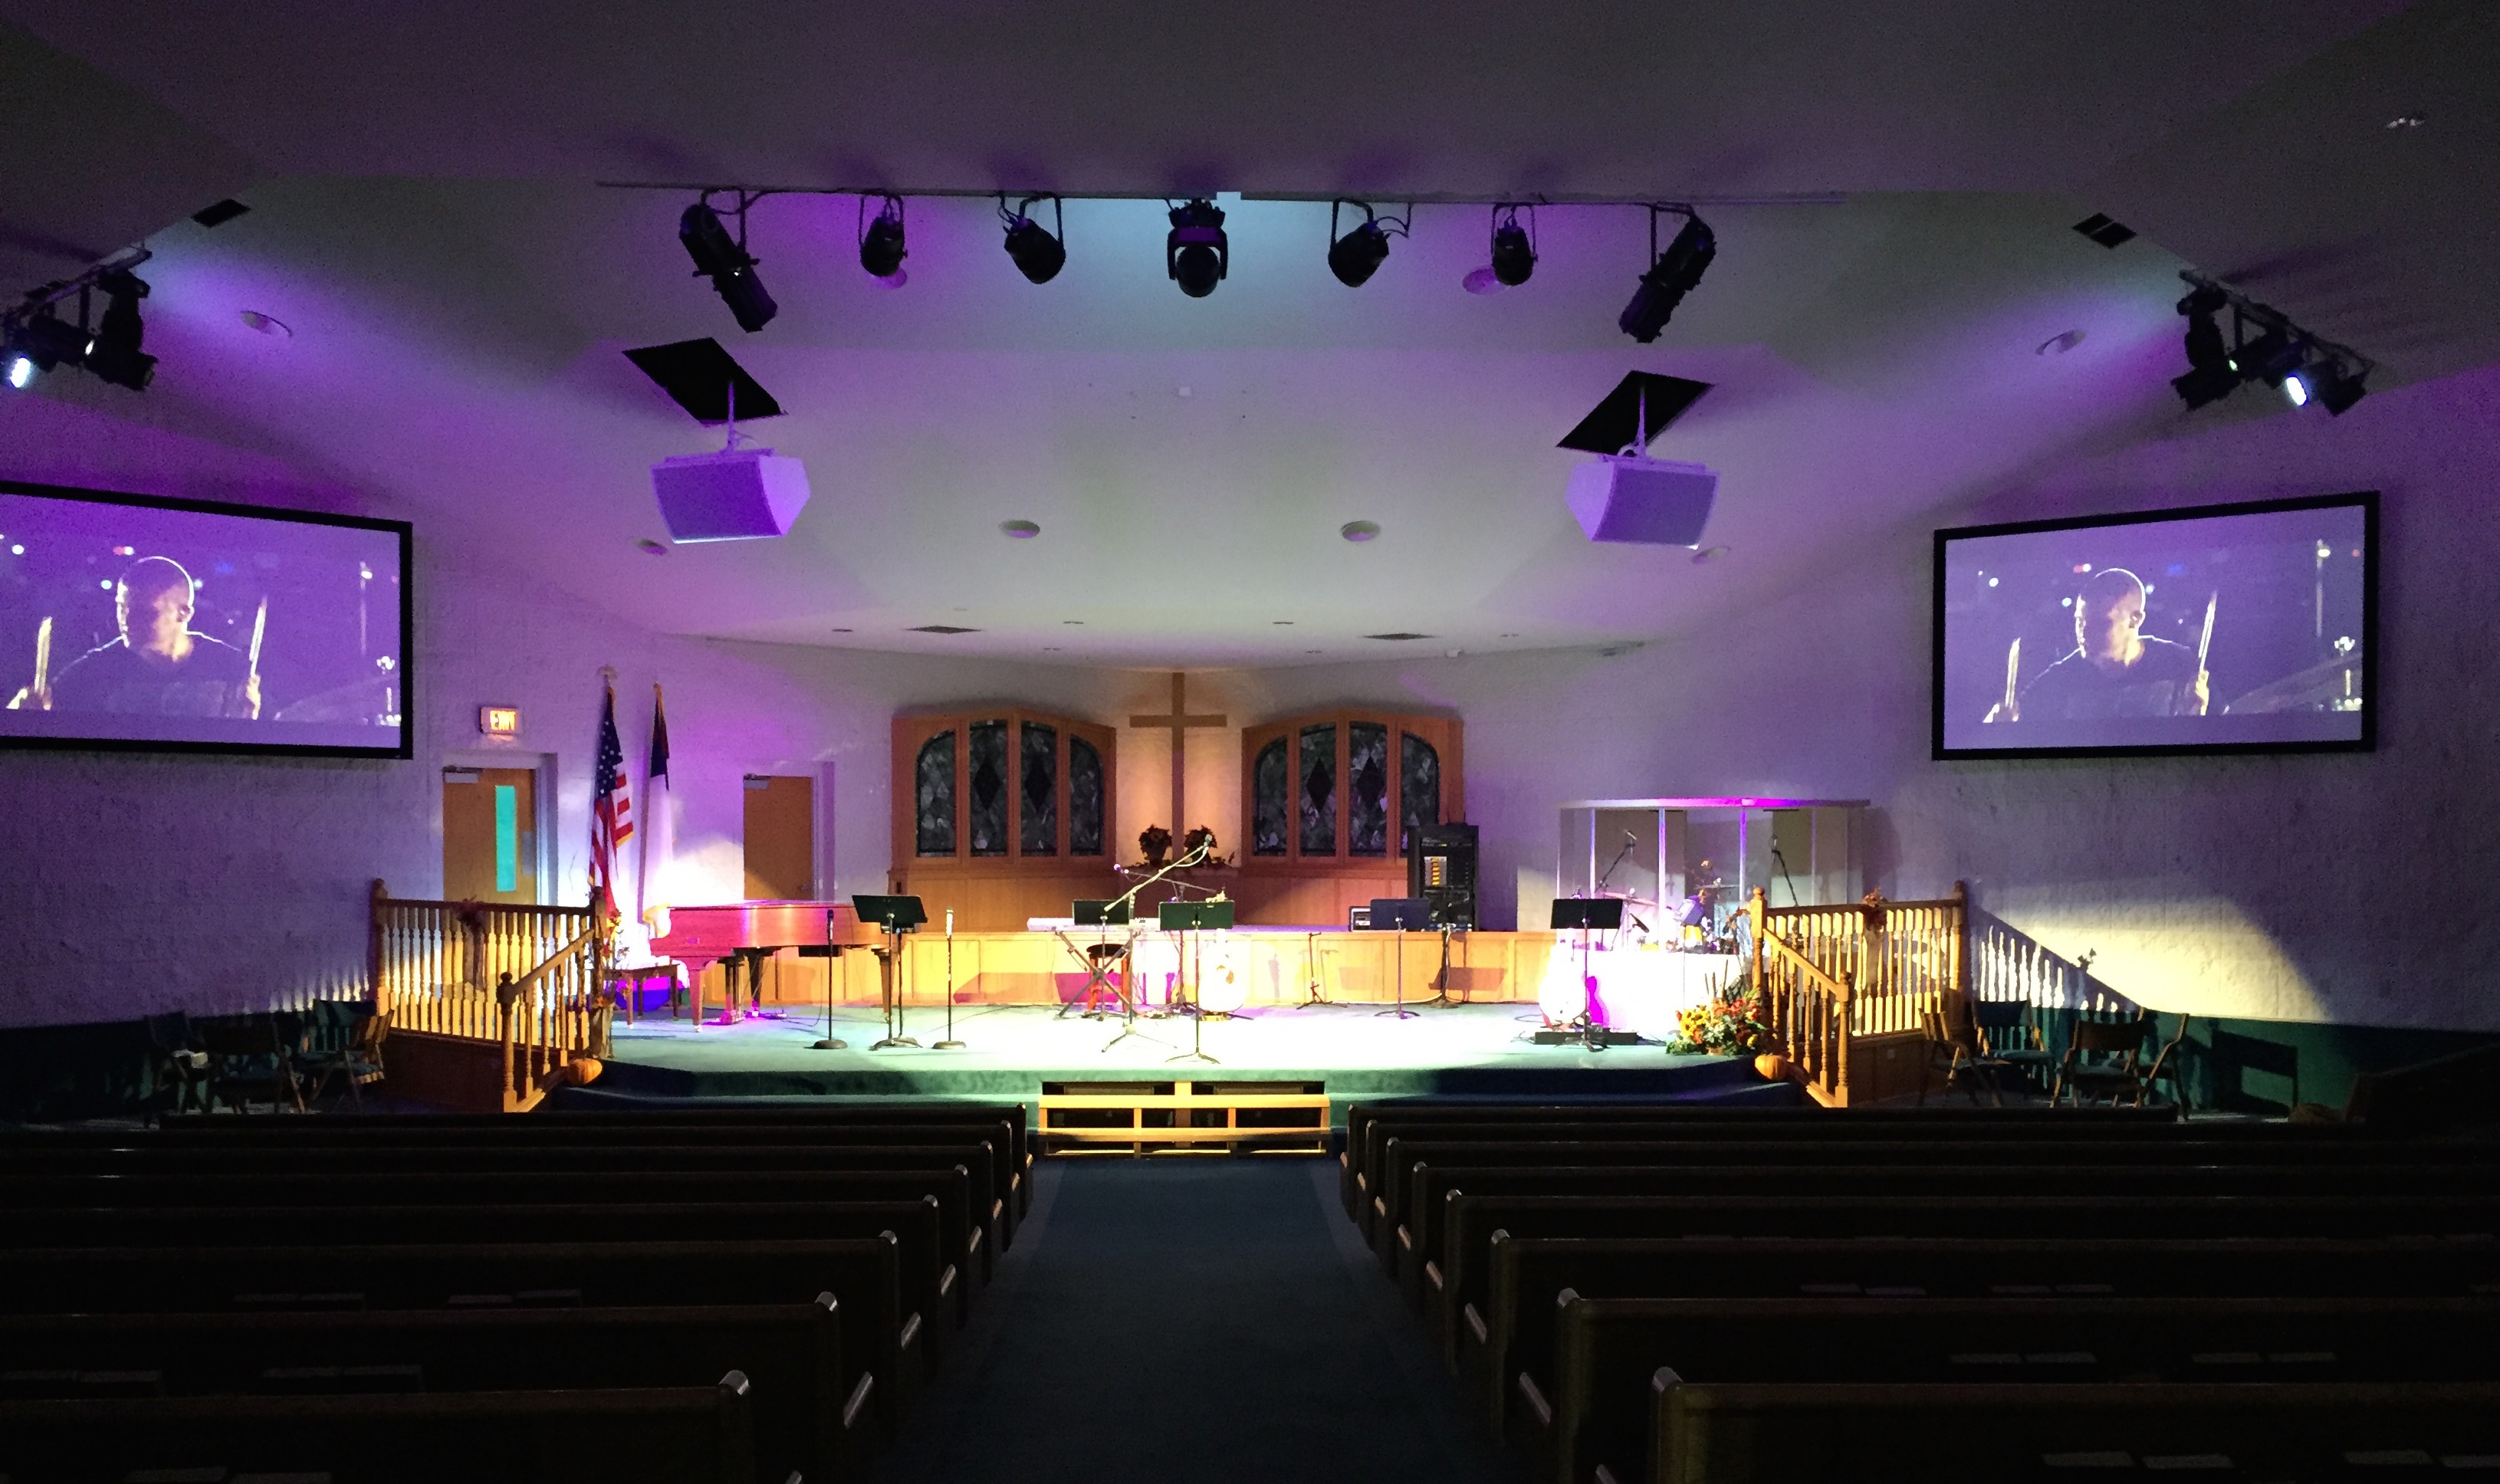 Powersoft Helps Bring Dynamic Sound To Bayside Baptist